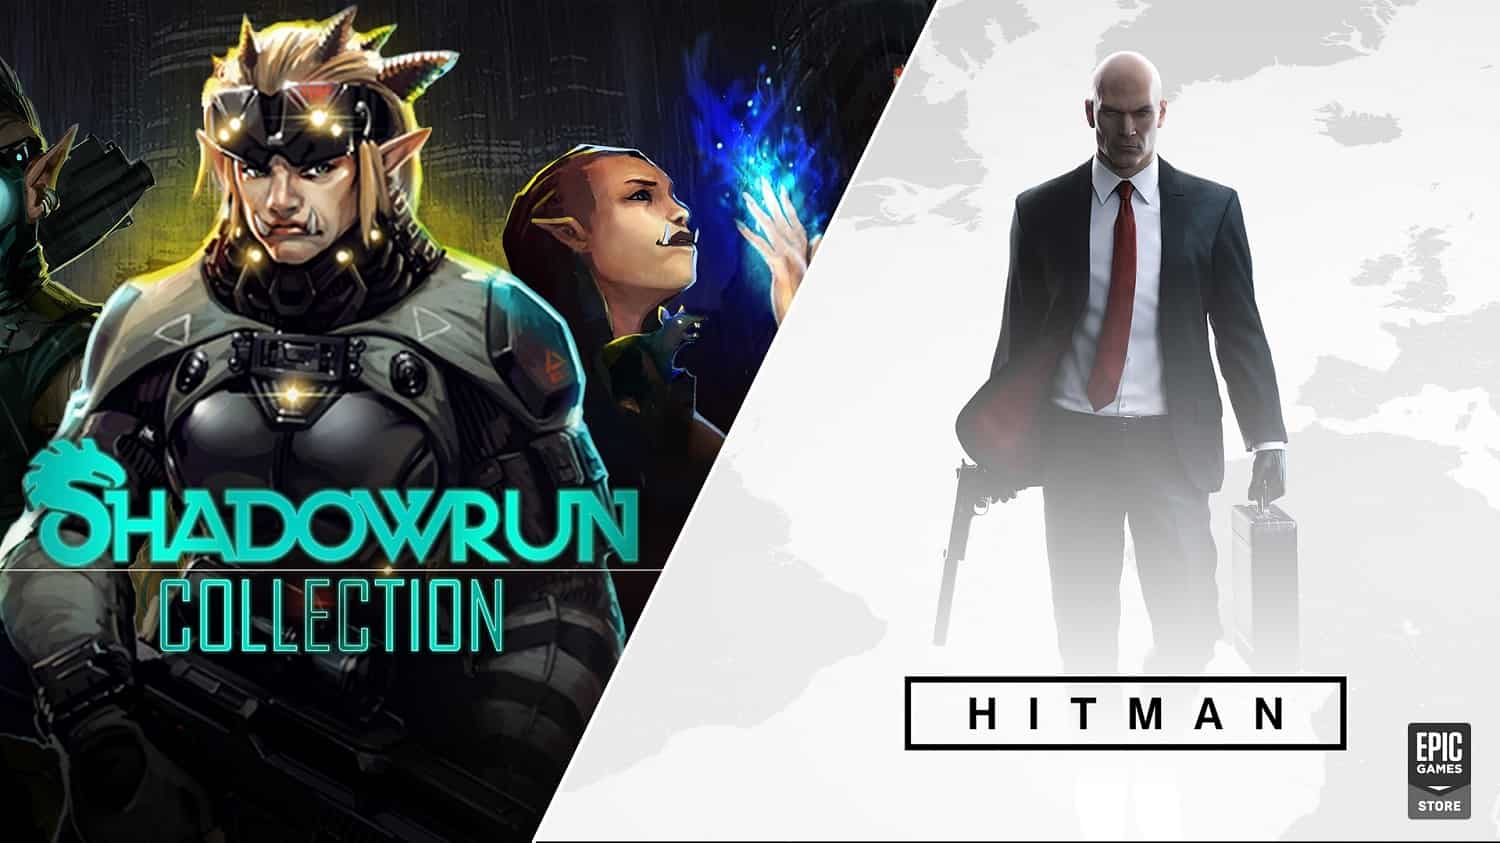 Get HITMAN and the Shadowrun Collection for free this week